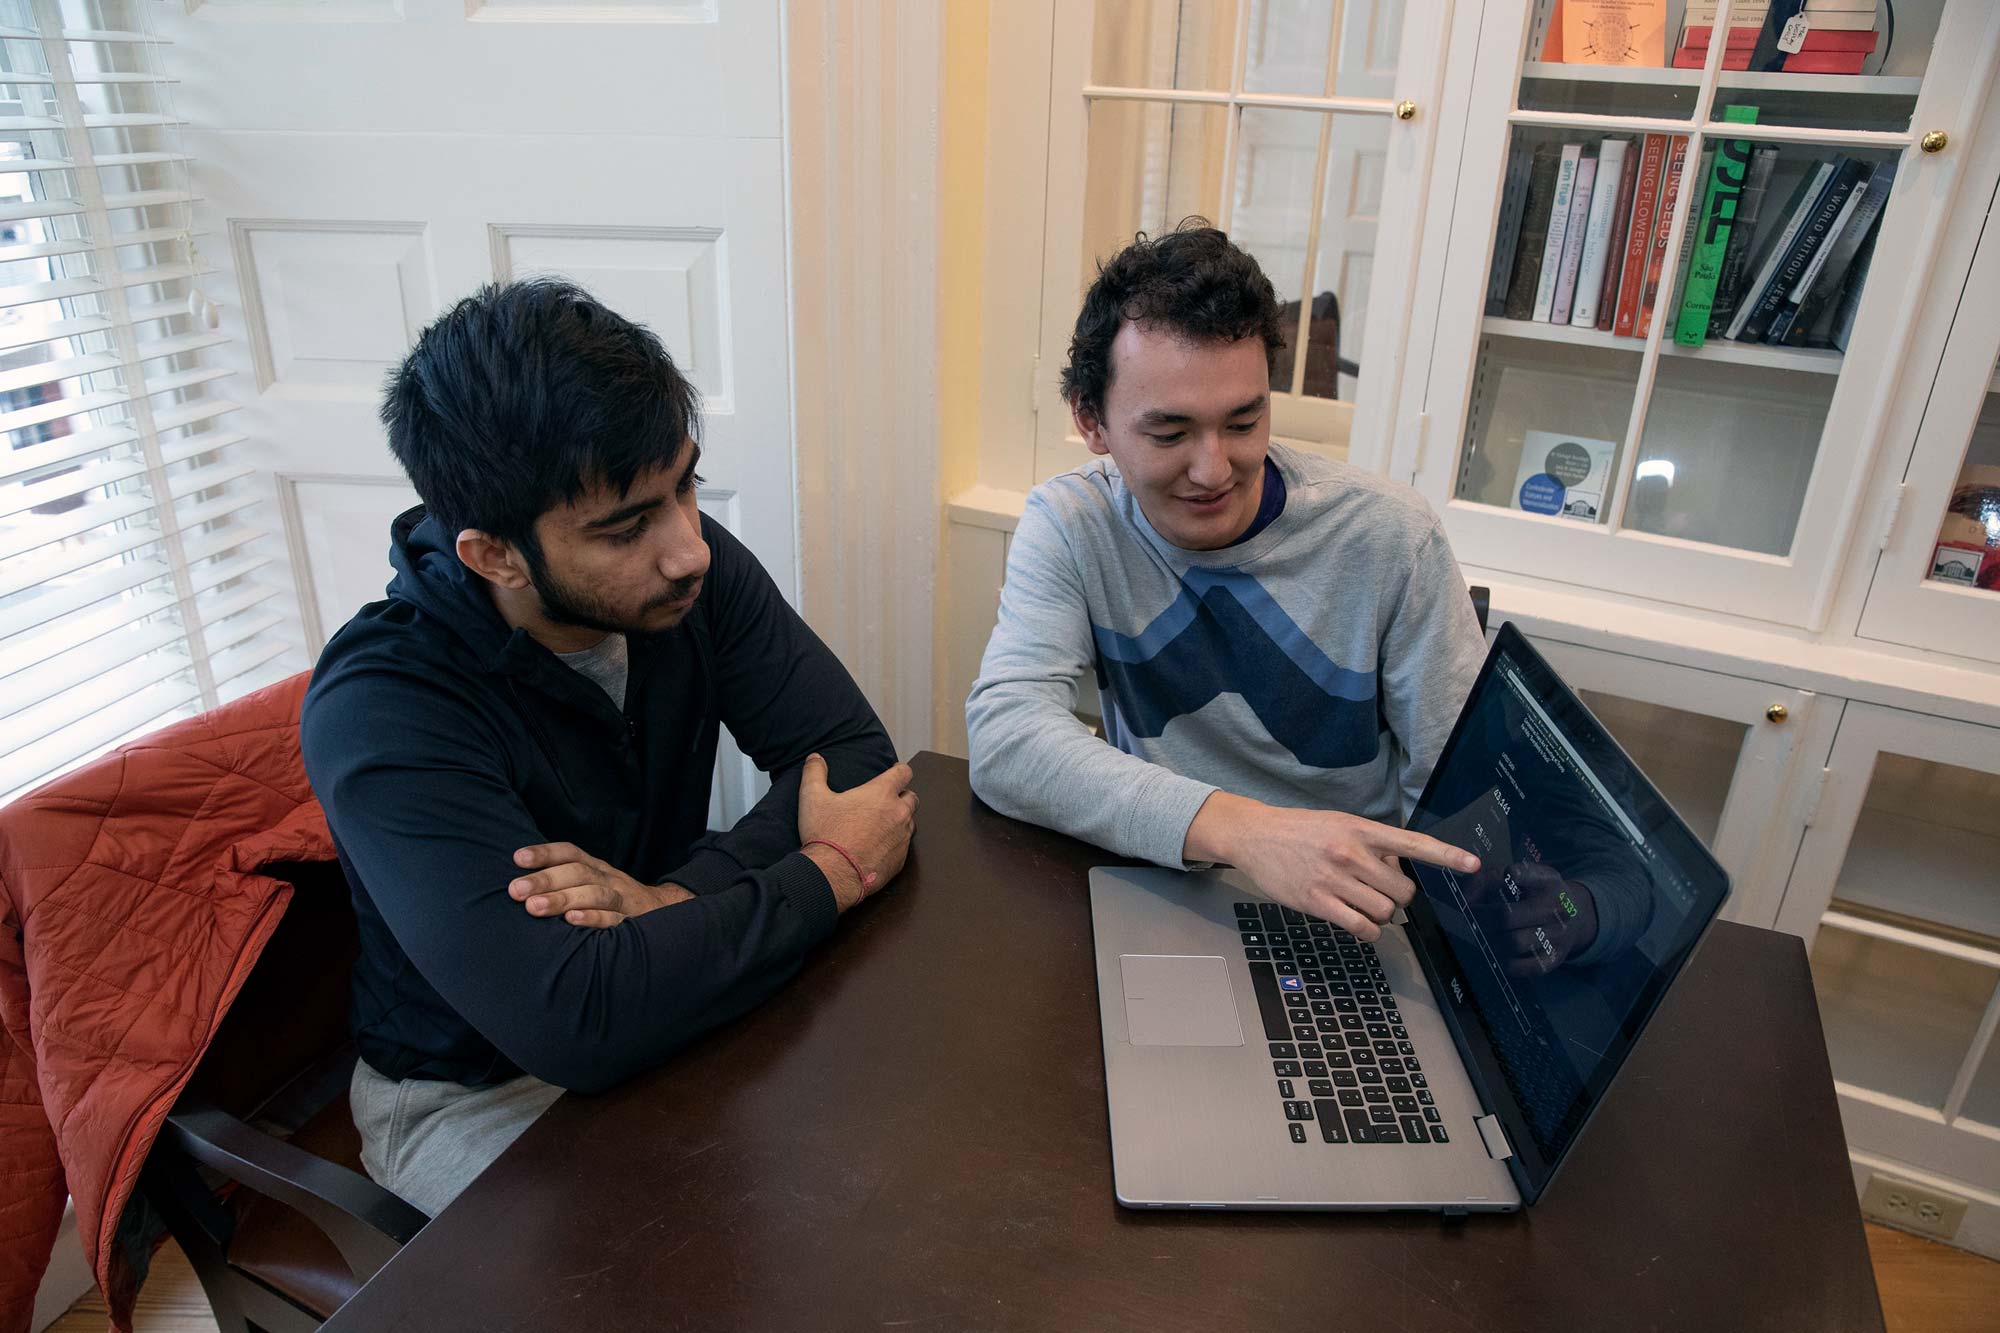 Soukarya Ghosh, left, and James Yun, right working together on a laptop